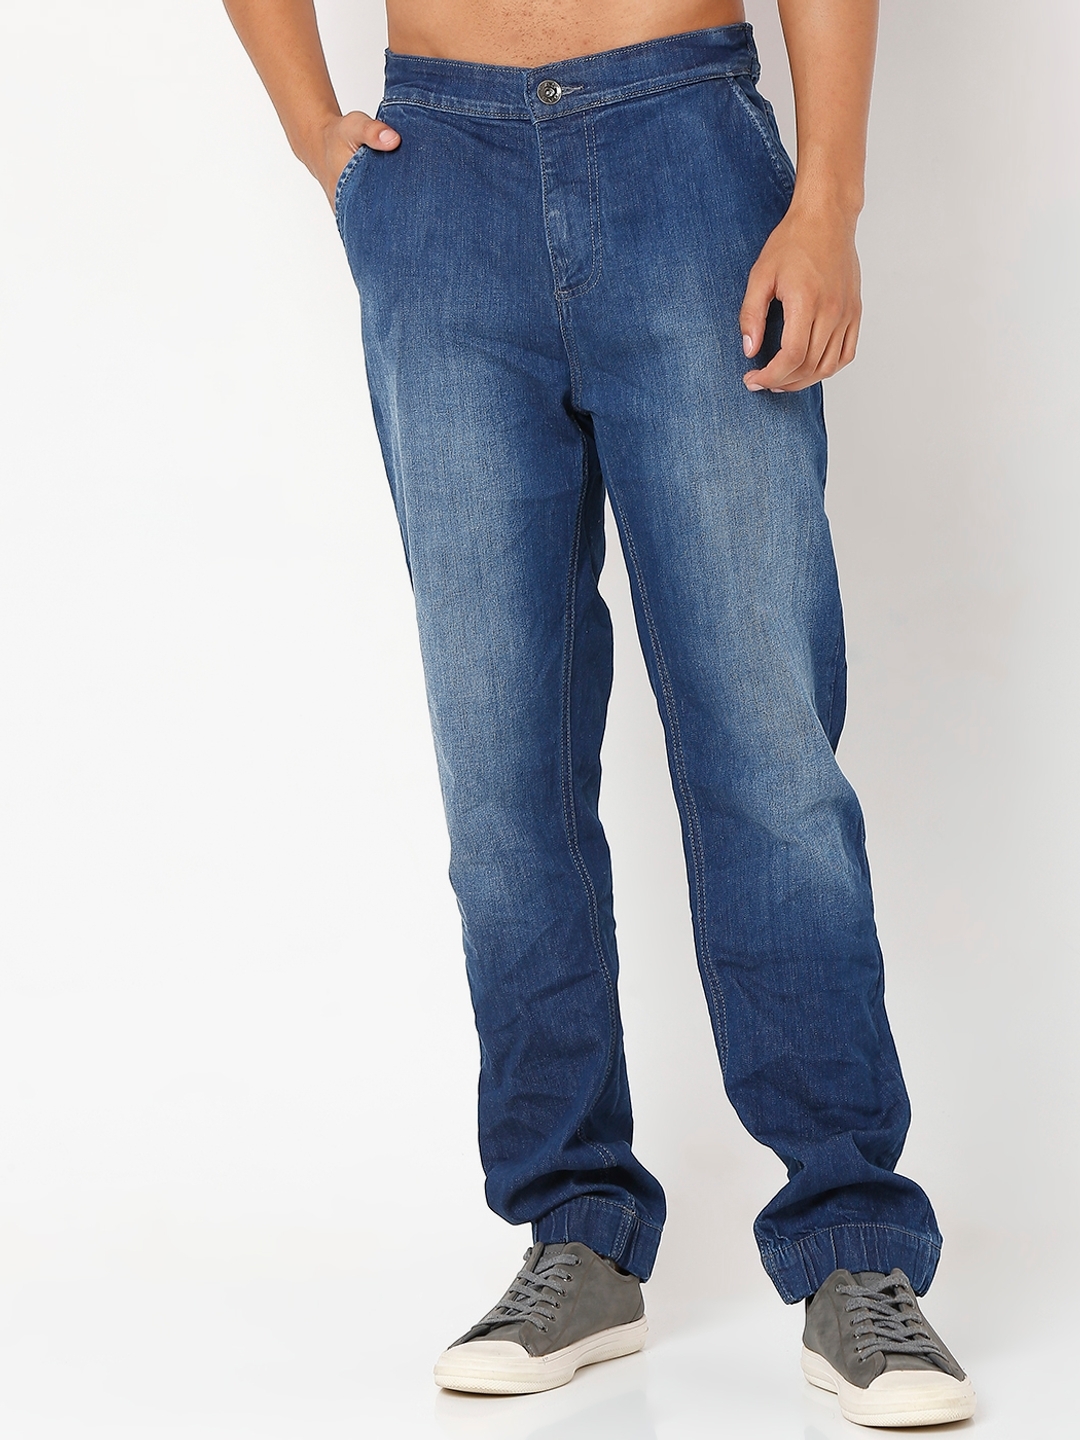 D. No. 538 Big Size Sloper Gents Jeans in Chandigarh at best price by Saheb  Apparels - Justdial